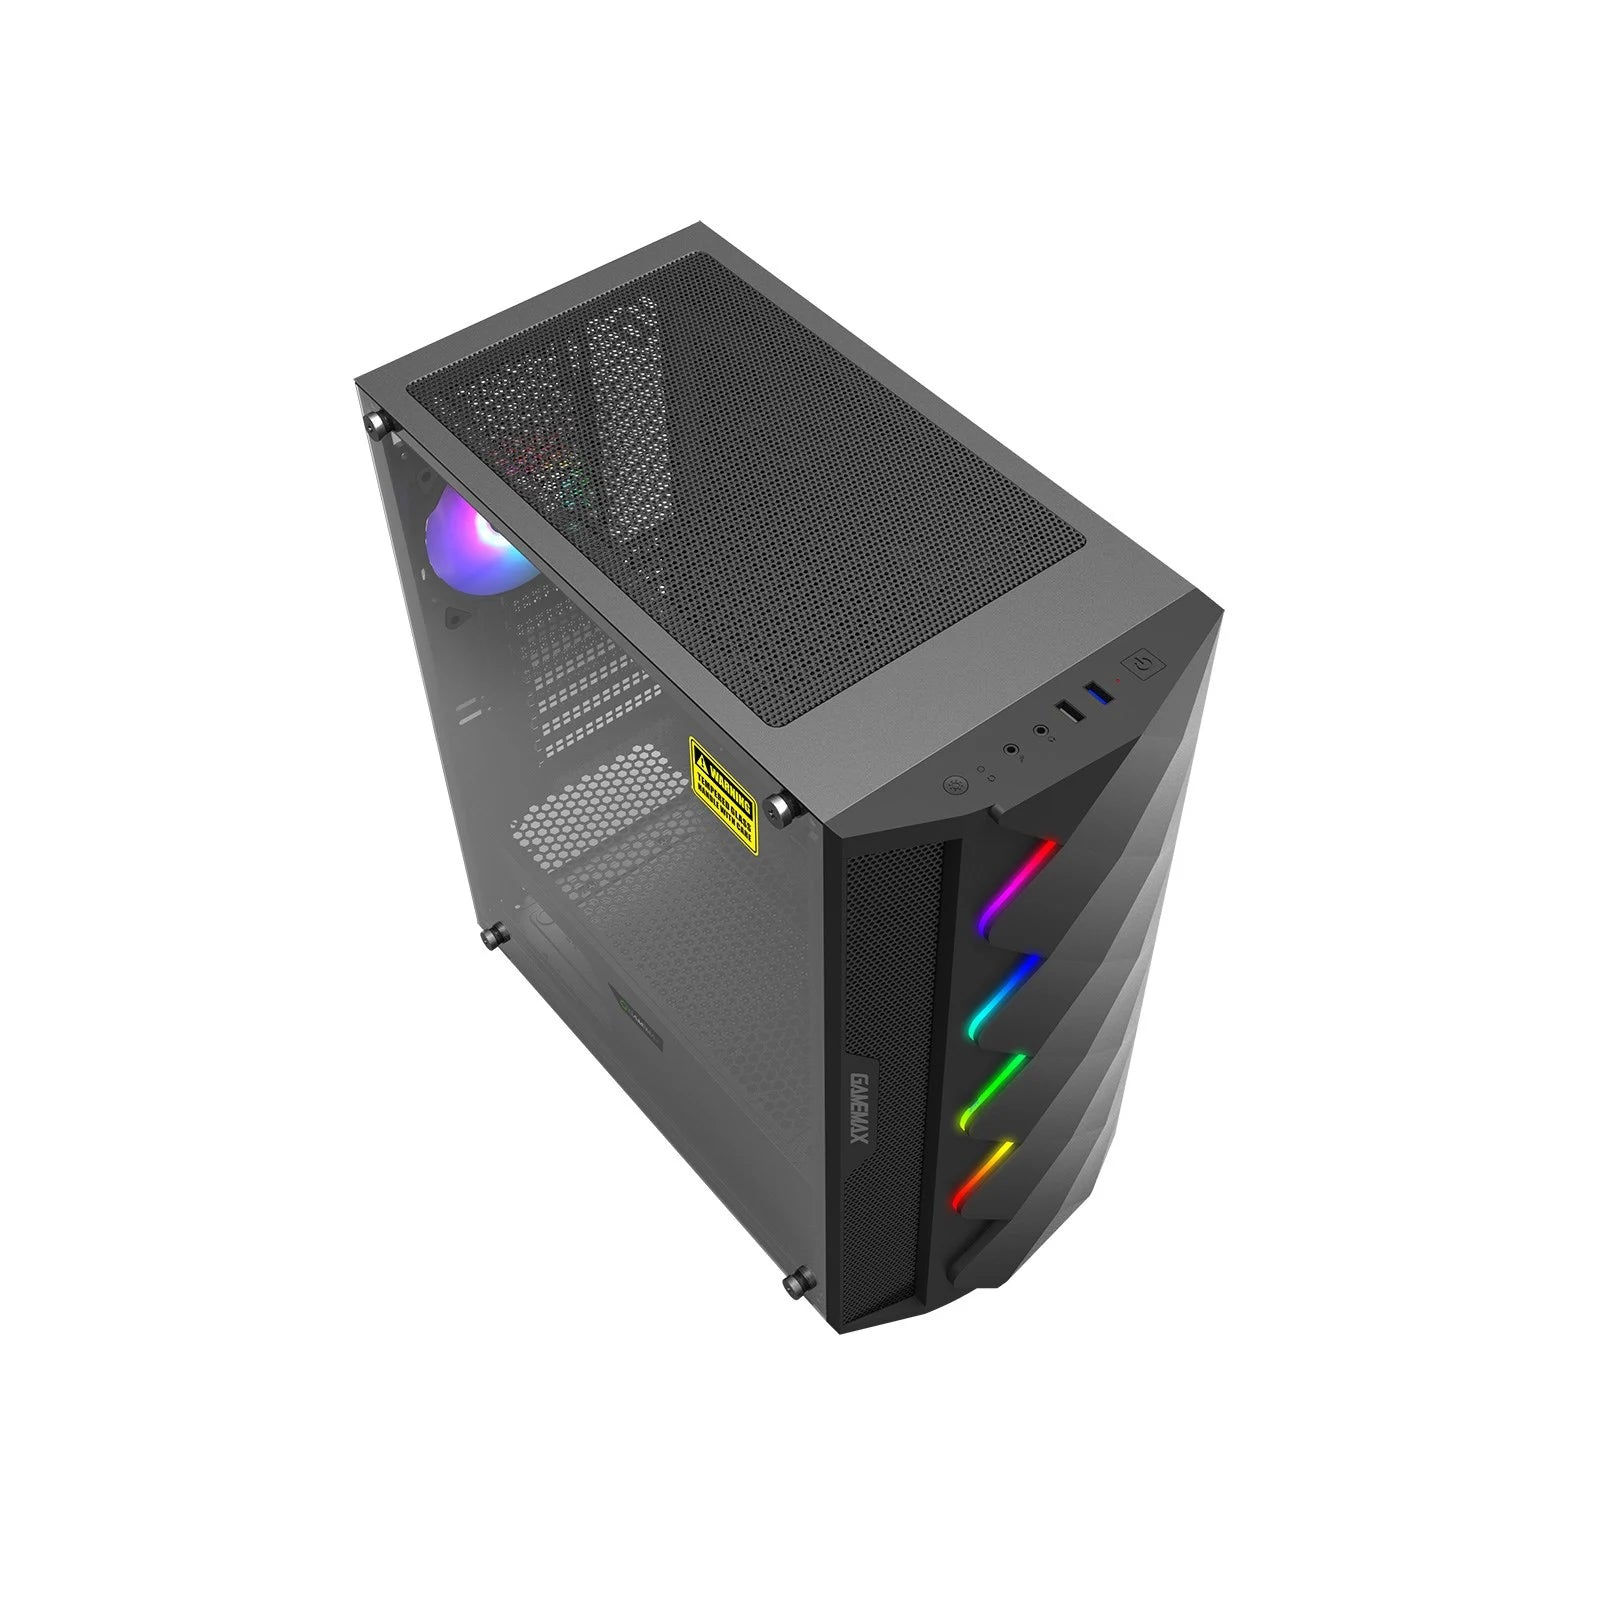  GameMax Black Diamond ARGB Mid-Tower PC Gaming Case, ATX, 3 Pin  Aura Male & Female Connectors, Built in ARGB LED Strip, 1 x 120mm ARGB Fan  Included, Water-Cooling Ready